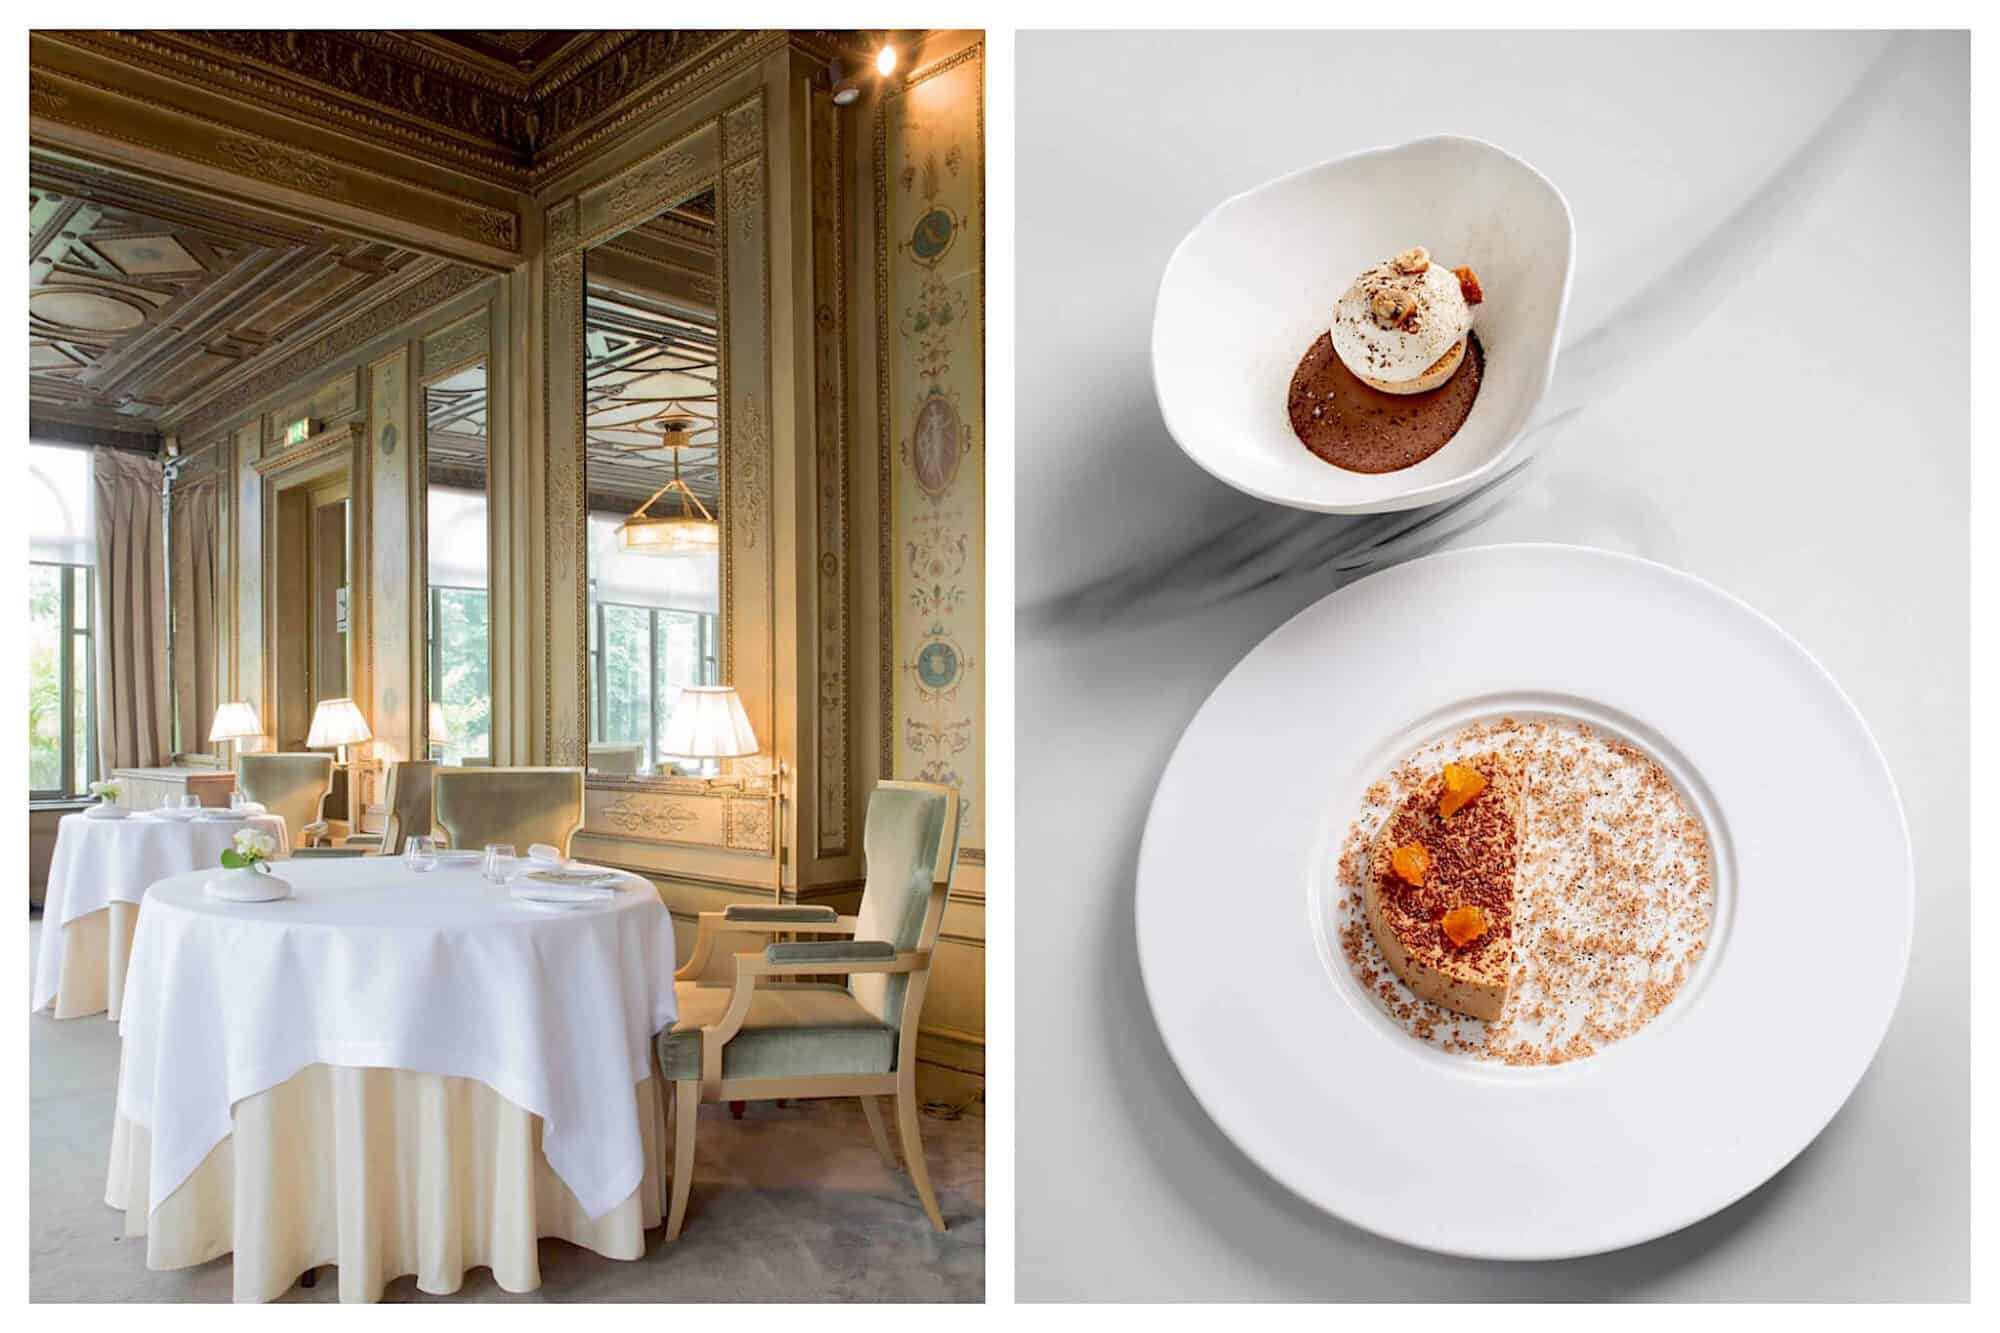 Left: The inside of Pavyllon restaurant on the Champs Elysées. Large mirrors are hung on the walls, and large circular tables are covered with tablecloths, Right: A bowl and plate of desserts sit side by side at Pavyllon restaurant